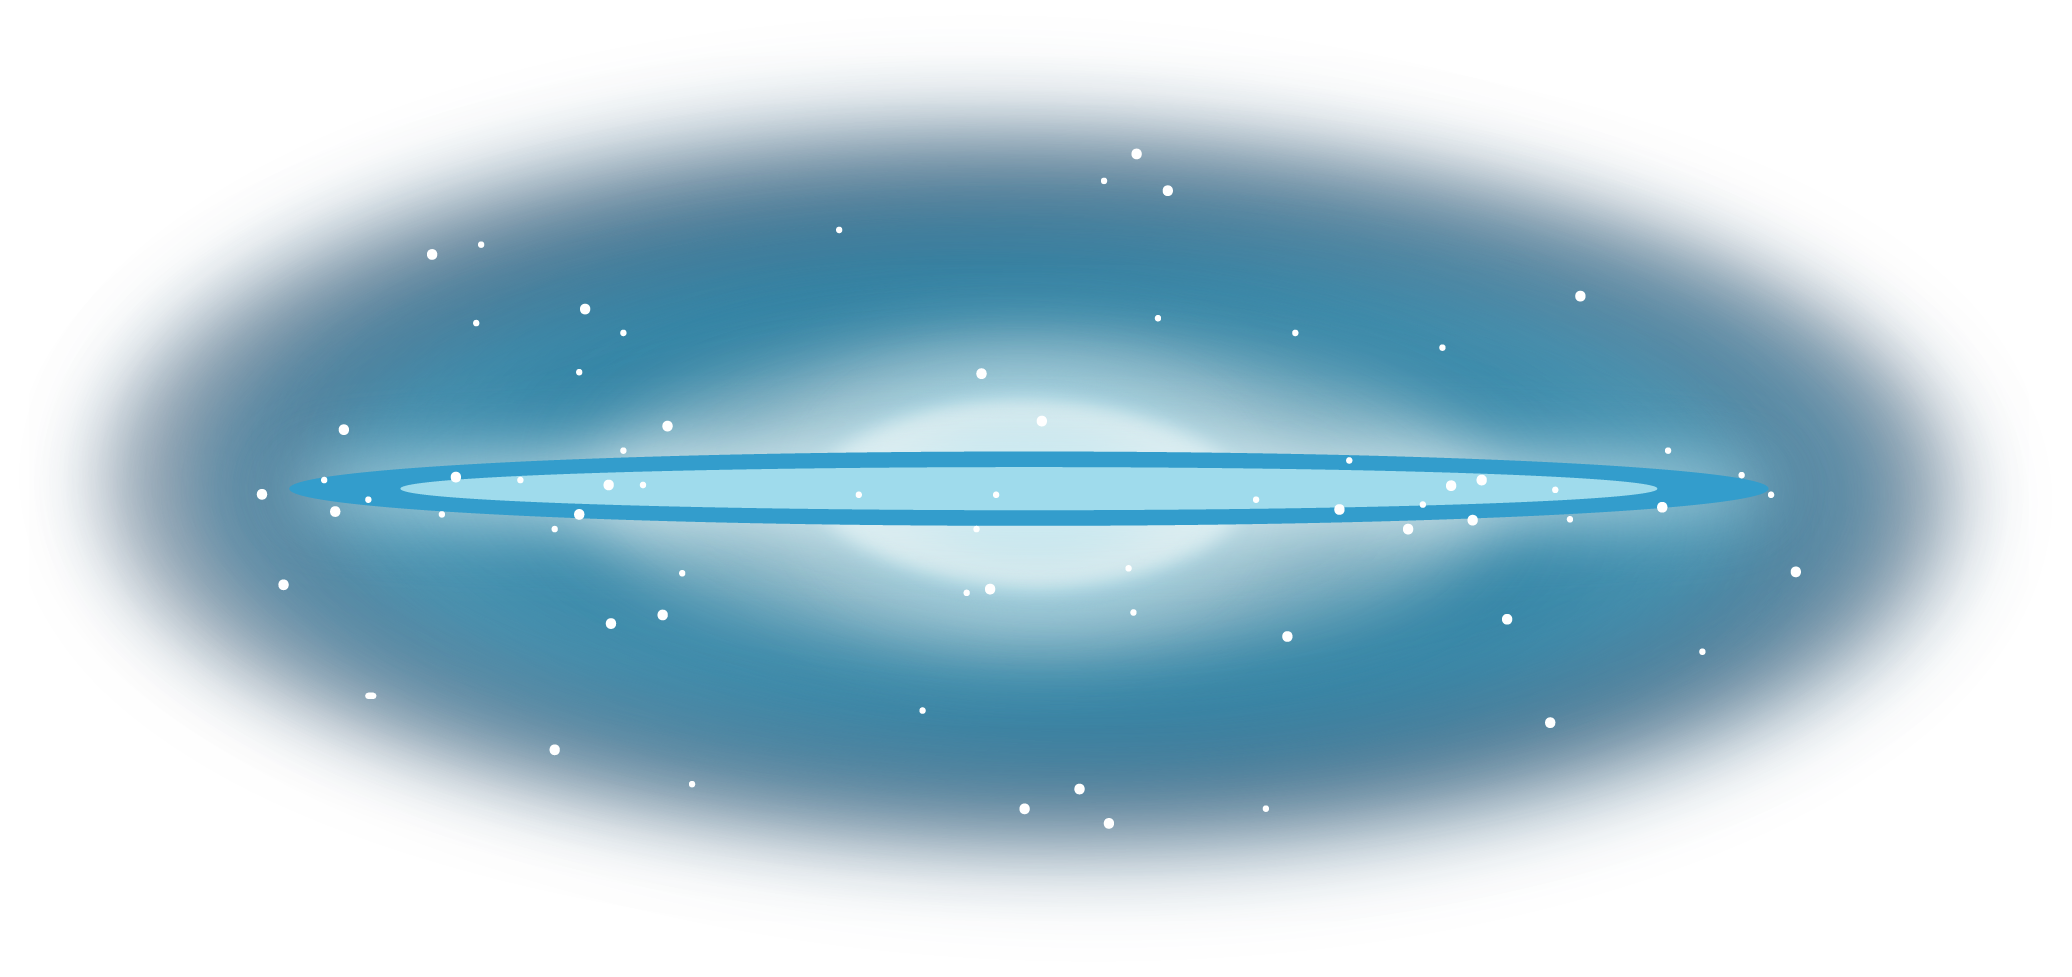 An illustration has an elongated oval in  light blue stretching across the center, outlined in a darker blue. Behind the strip is a diffuse, very light blue cloud that fades into a light blue and then a darker blue. All over the image are white speckles, representing stars.